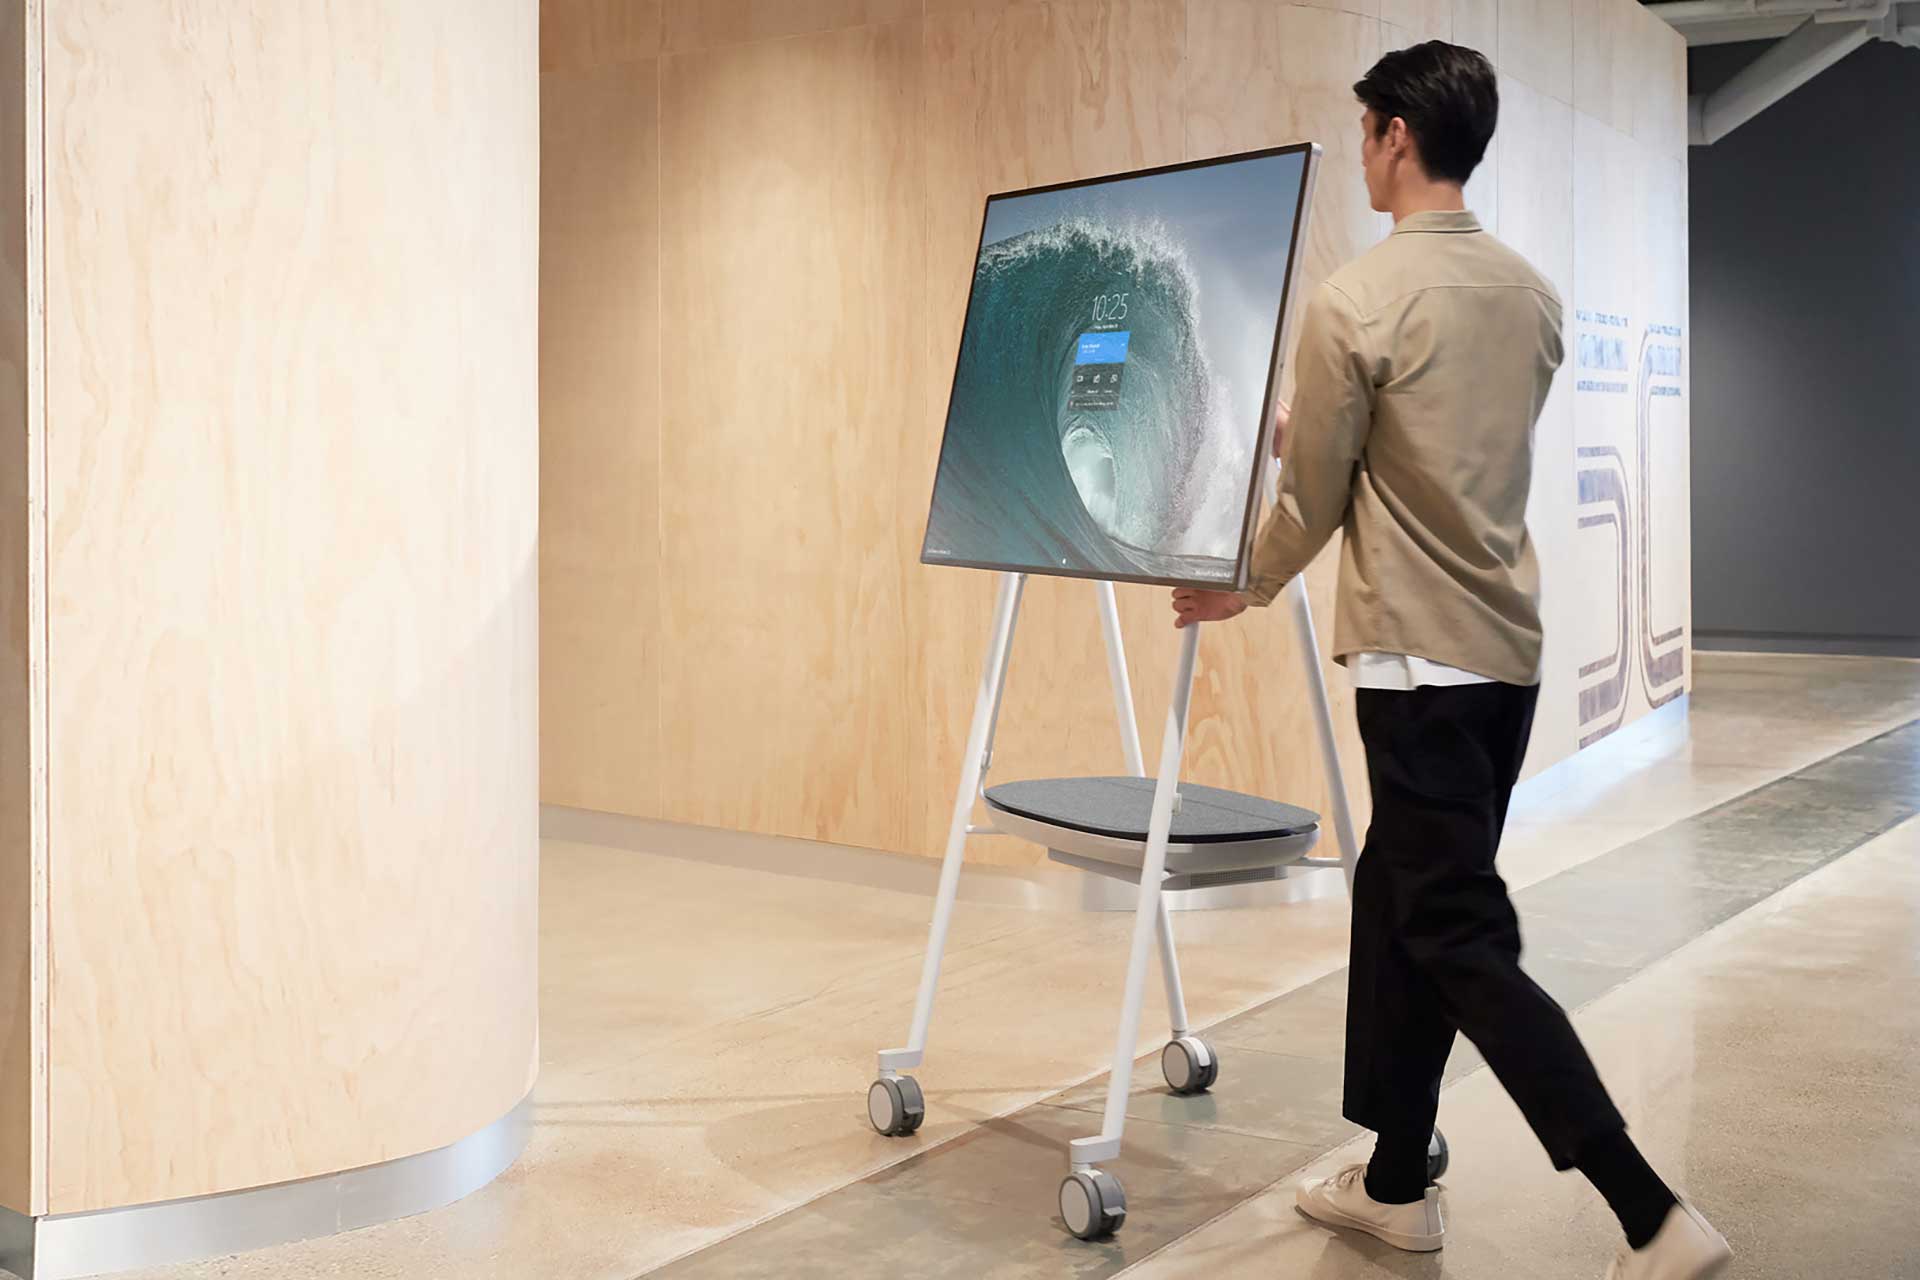 worker transports surface hub between rooms